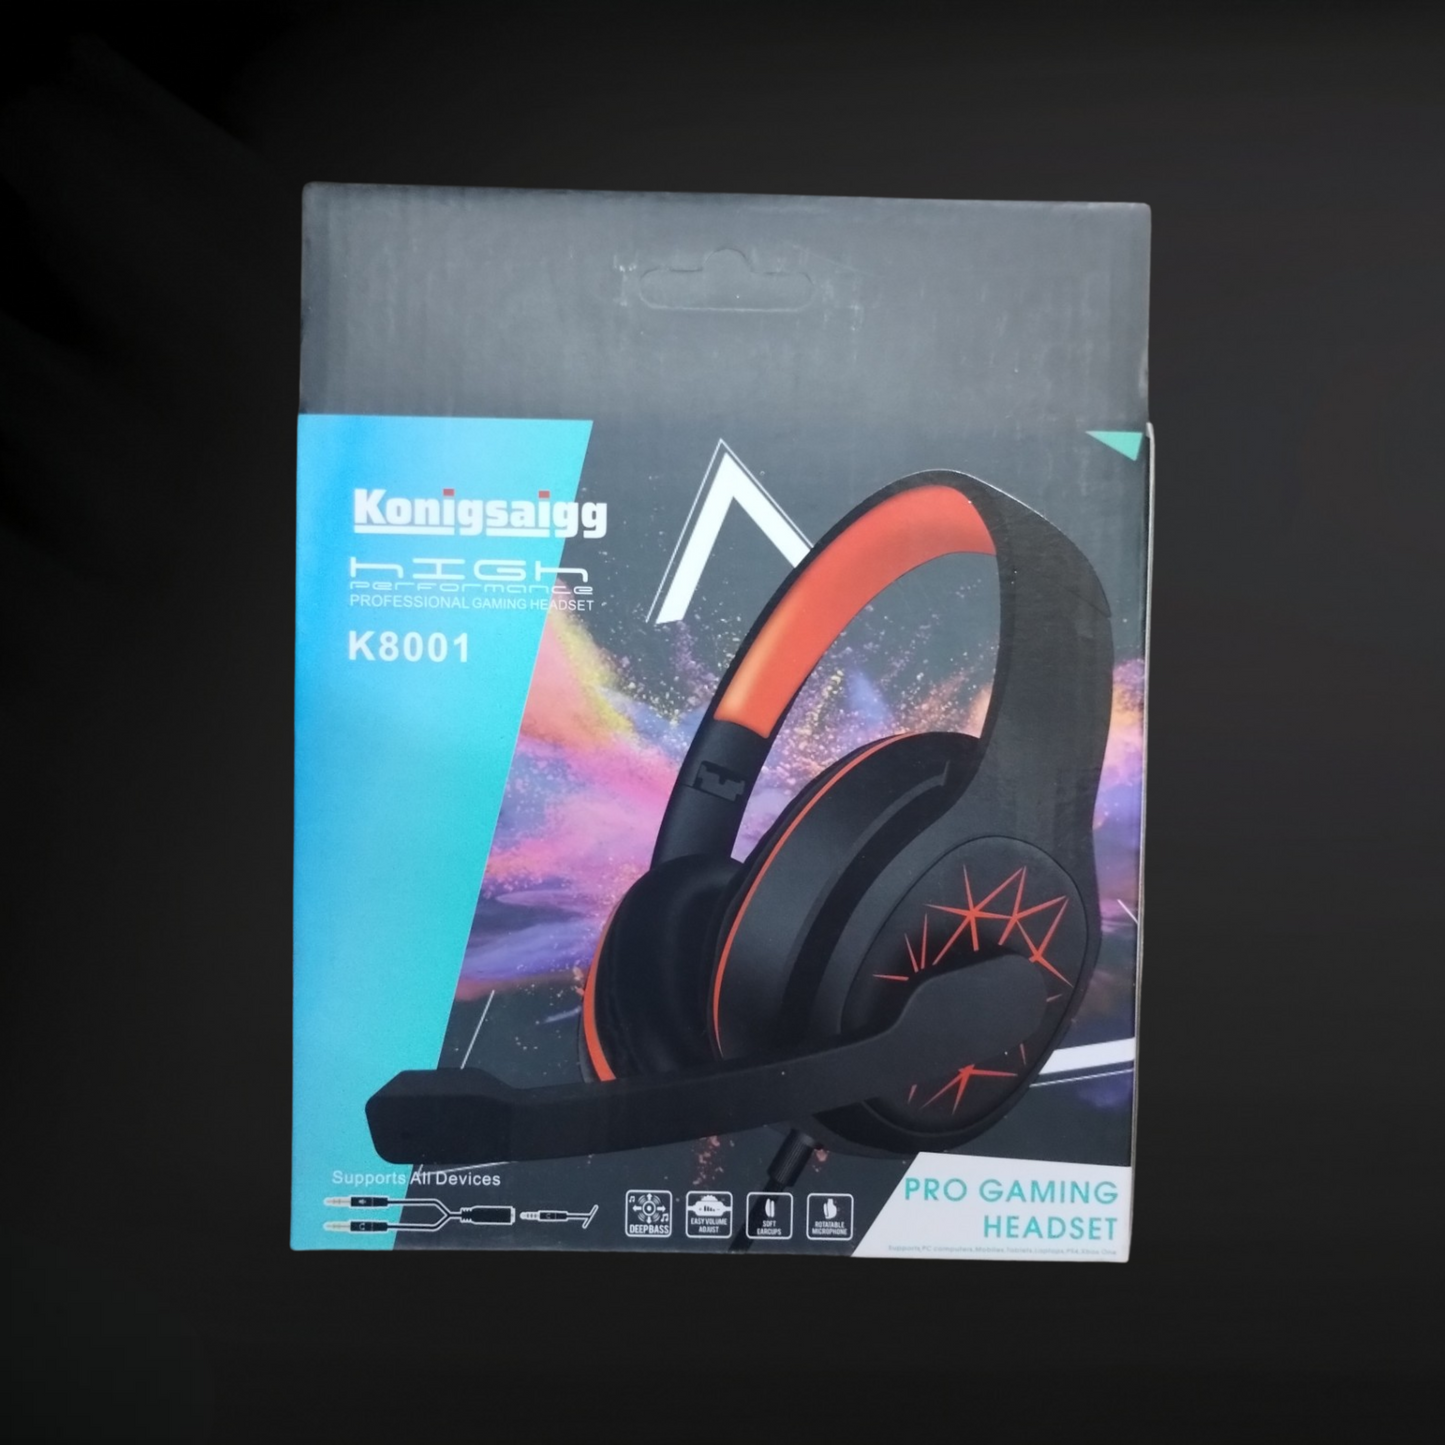 Konigsaigg Gaming Headset with Mic - Red and Blue - Zack Wholesale